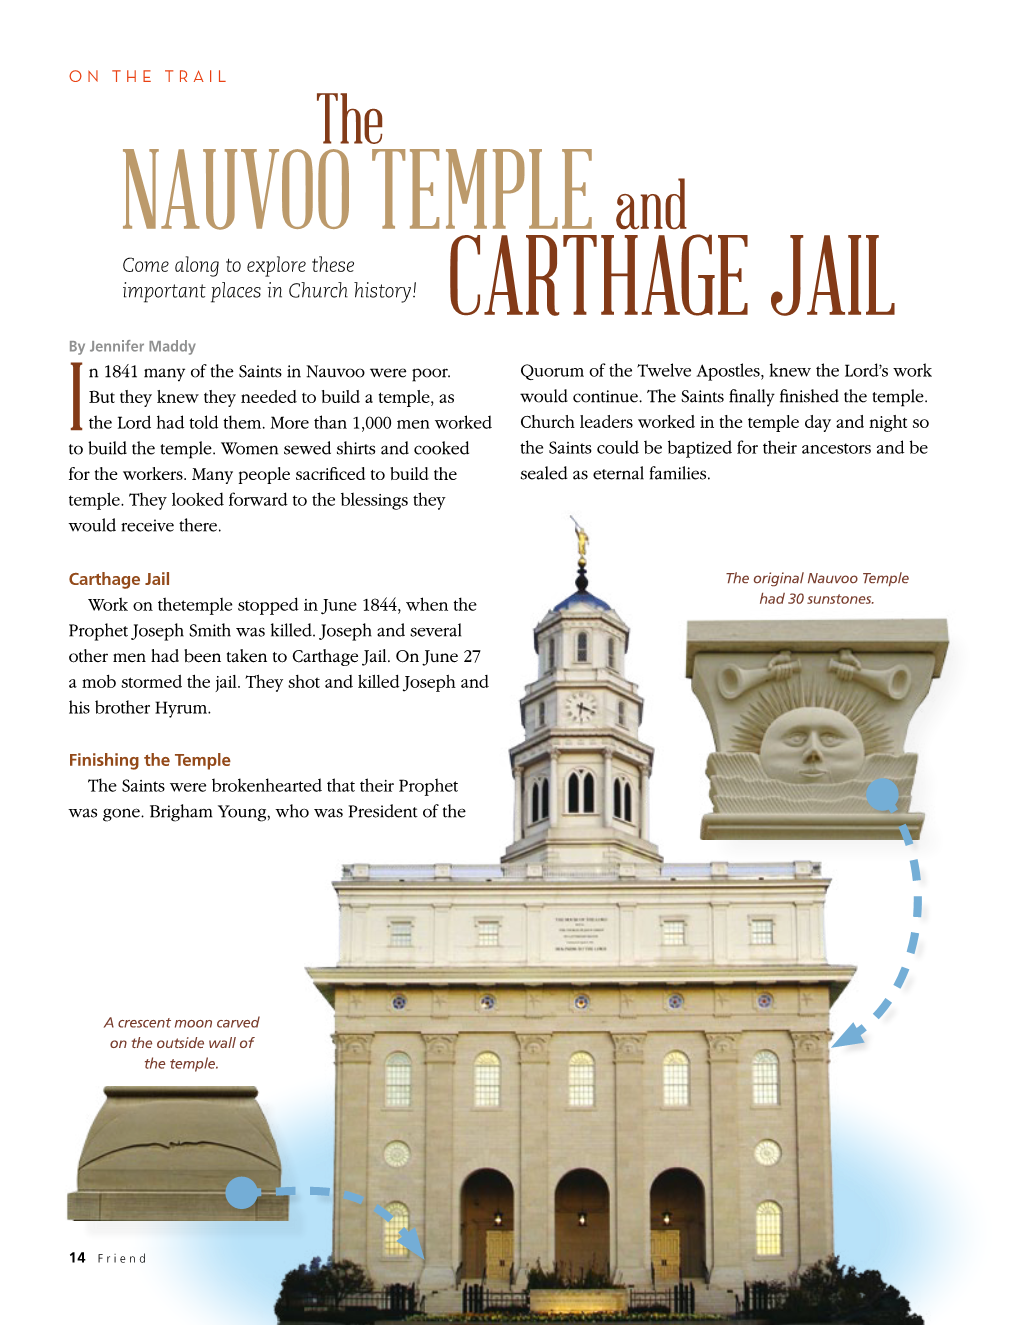 The Nauvoo Temple and Carthage Jail